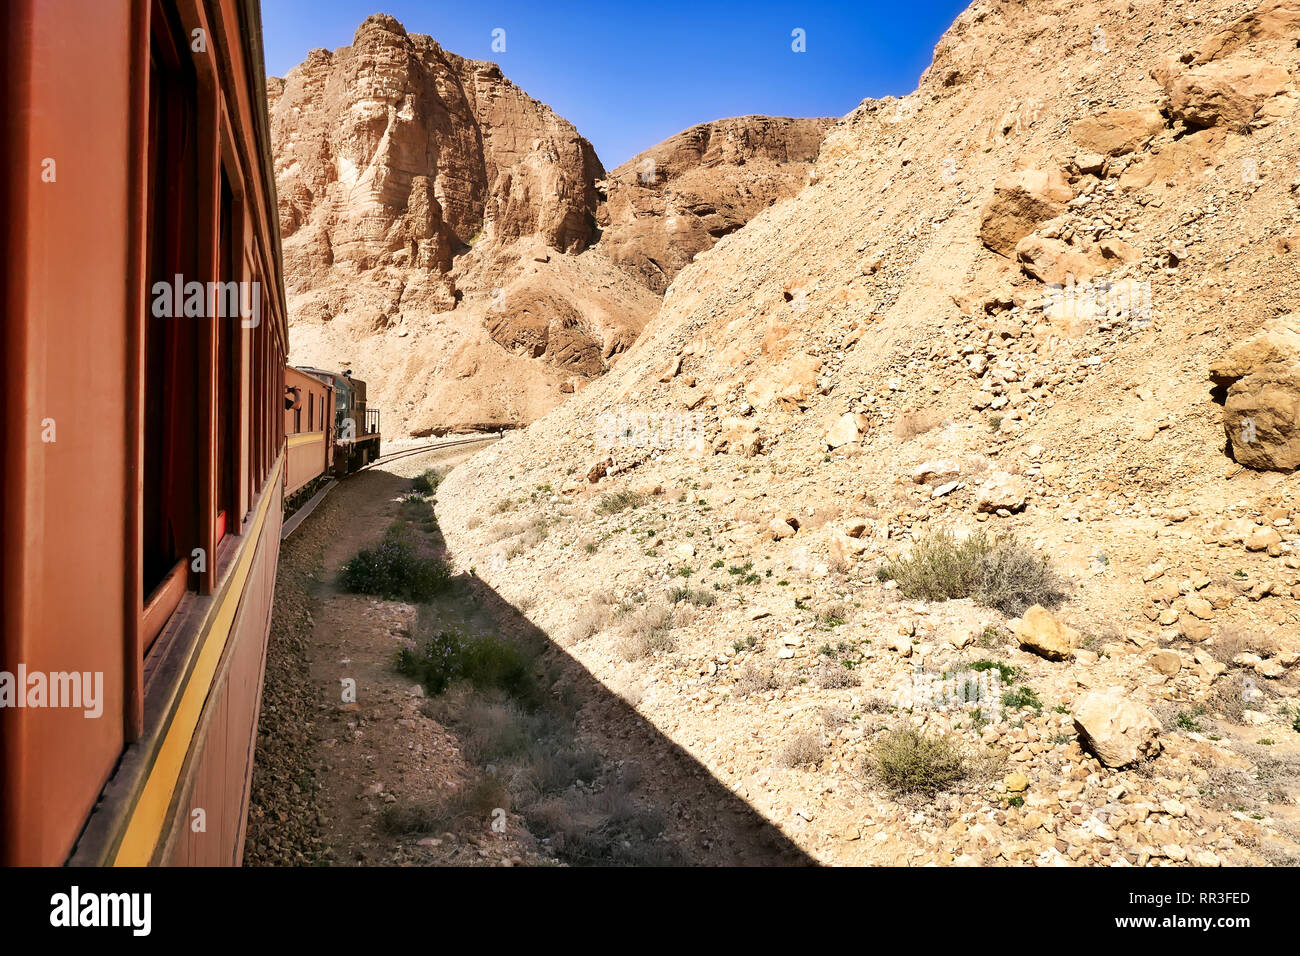 The Lezard Rouge (Red Lizard) is a nostalgic train that runs between Redeyef and Métlaoui. The photo shows it in the Selja gorge. Stock Photo